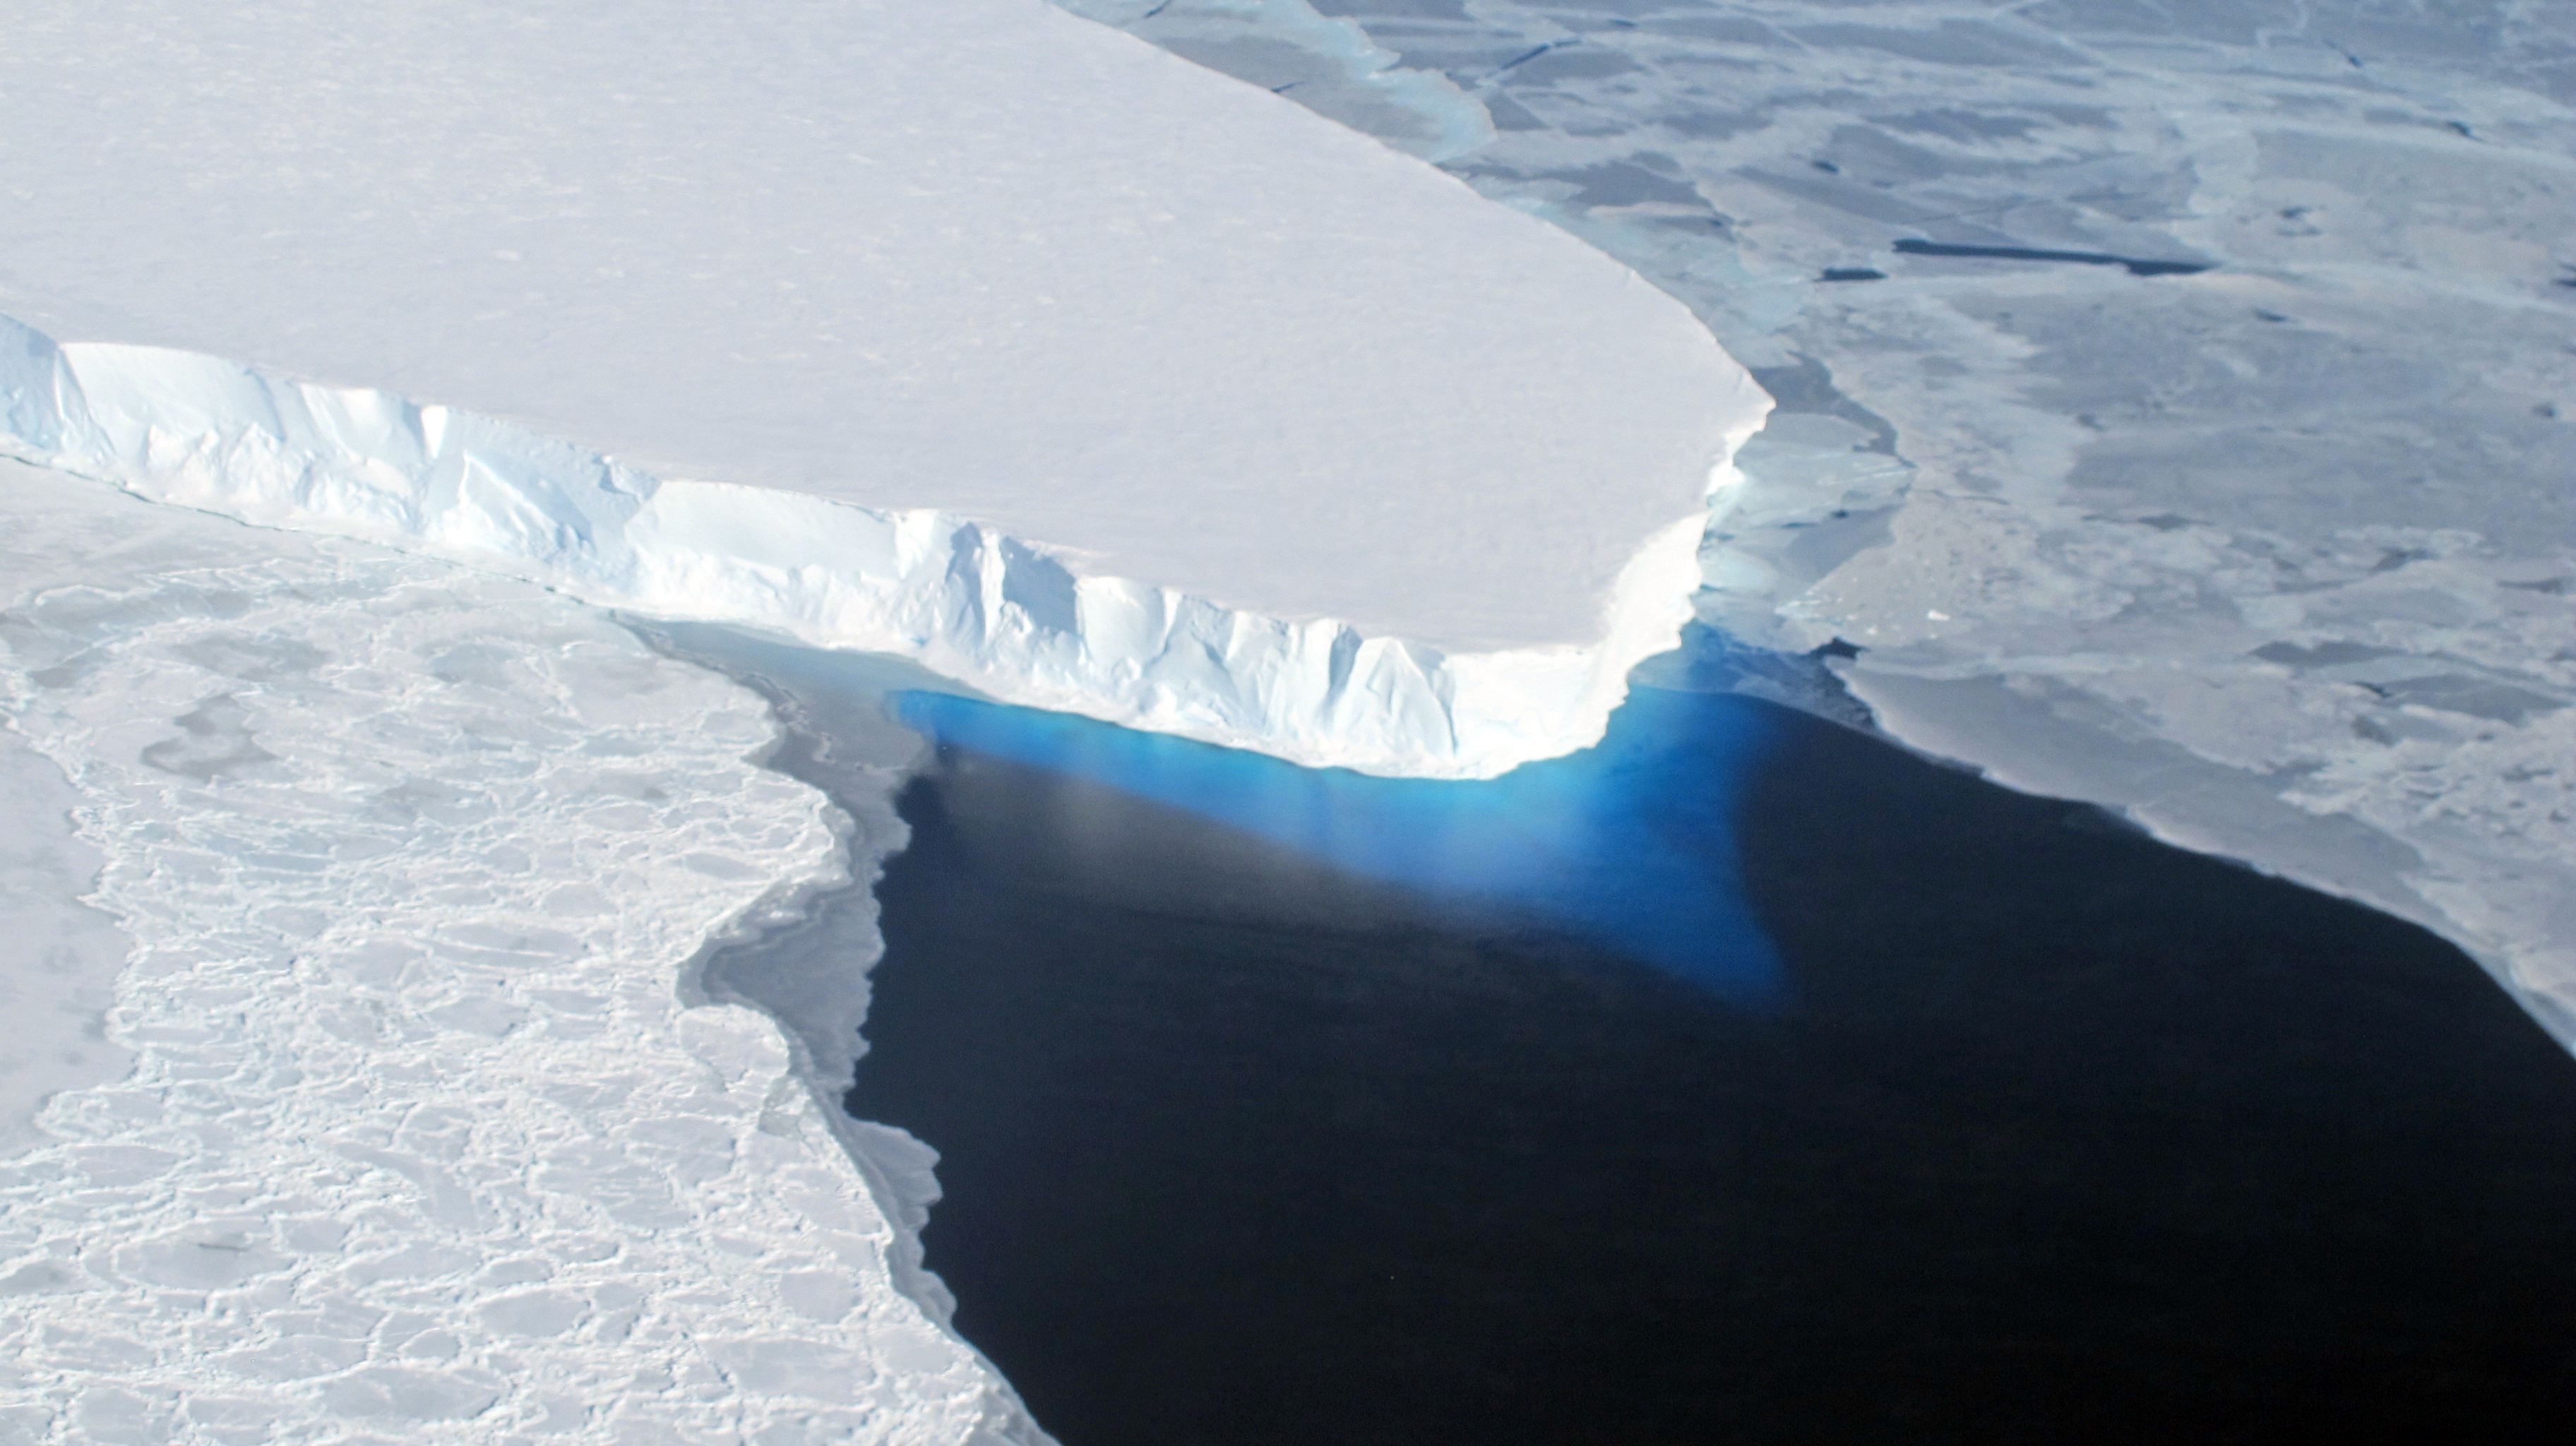 An area of open water surrounded by ice.